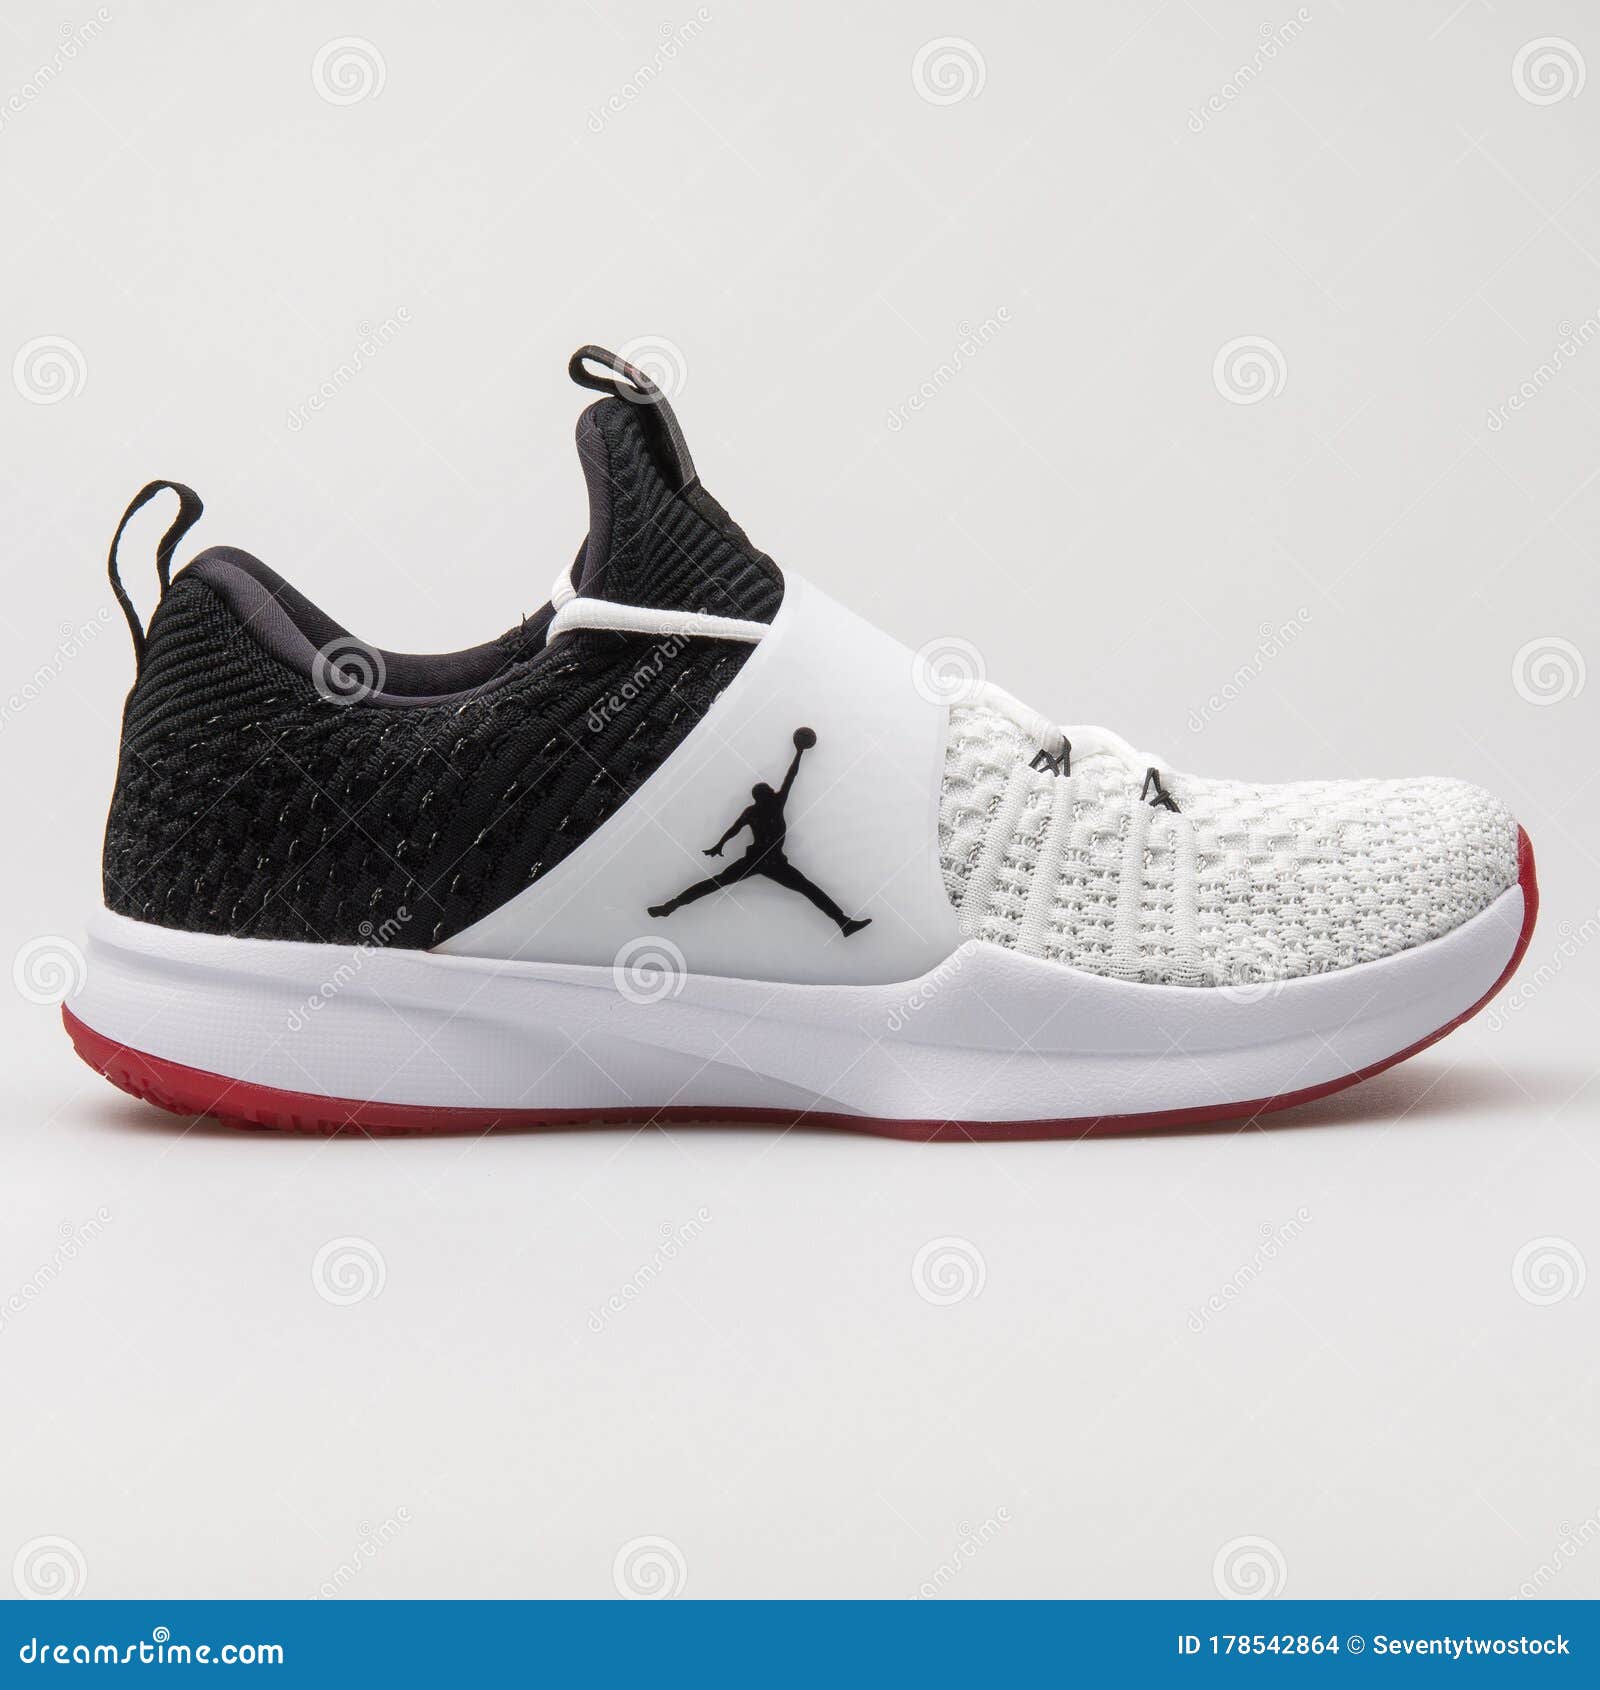 Nike Air Jordan Trainer 2 Flyknit Black and White Sneaker Editorial Stock  Image - Image of fitness, color: 178542864